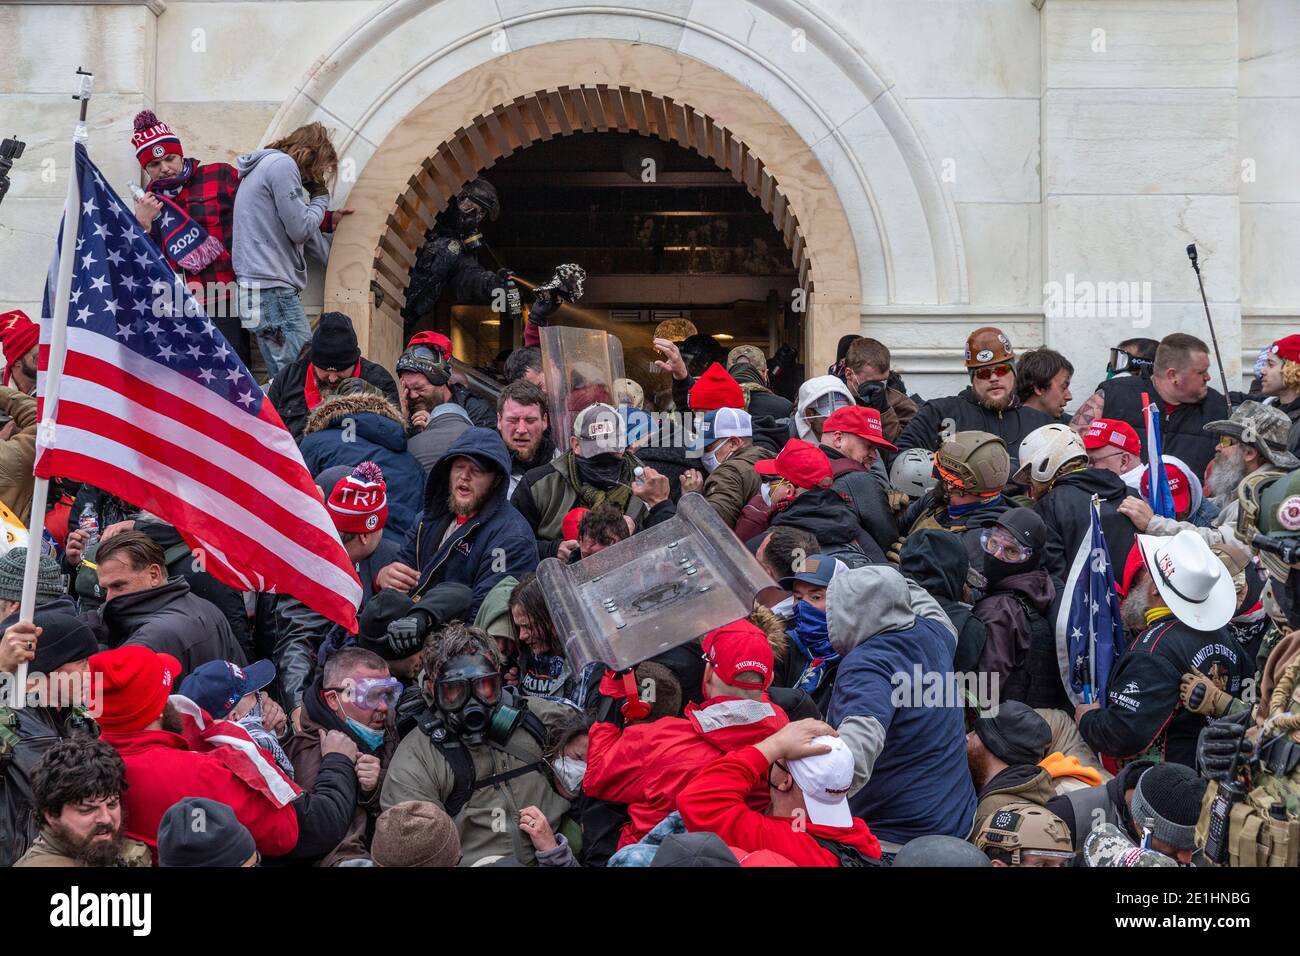 Washington, DC - January 6, 2021: Police use tear gas around Capitol building where pro-Trump supporters riot and breached the Capitol Stock Photo